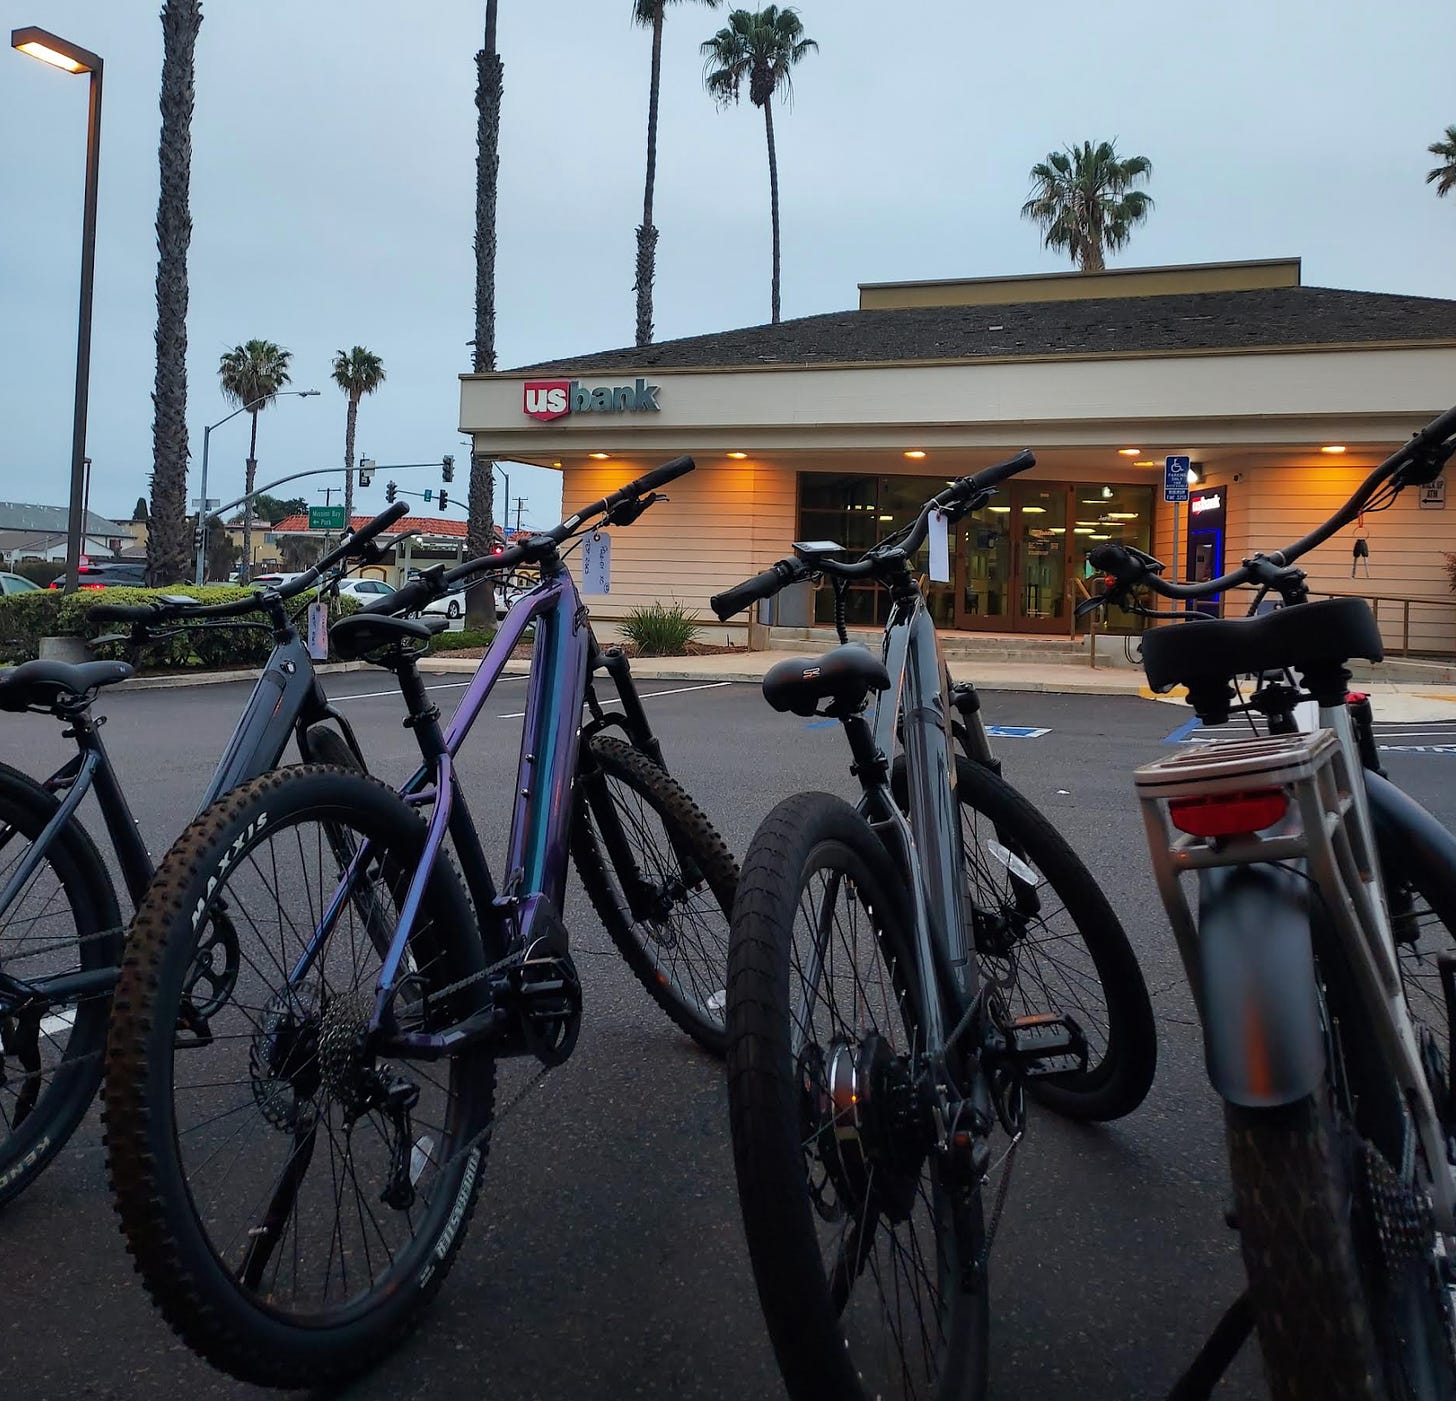 A view of four e-bikes lined up side by side from behind. In the background is a US Bank office set against a dawn sky and palm trees.